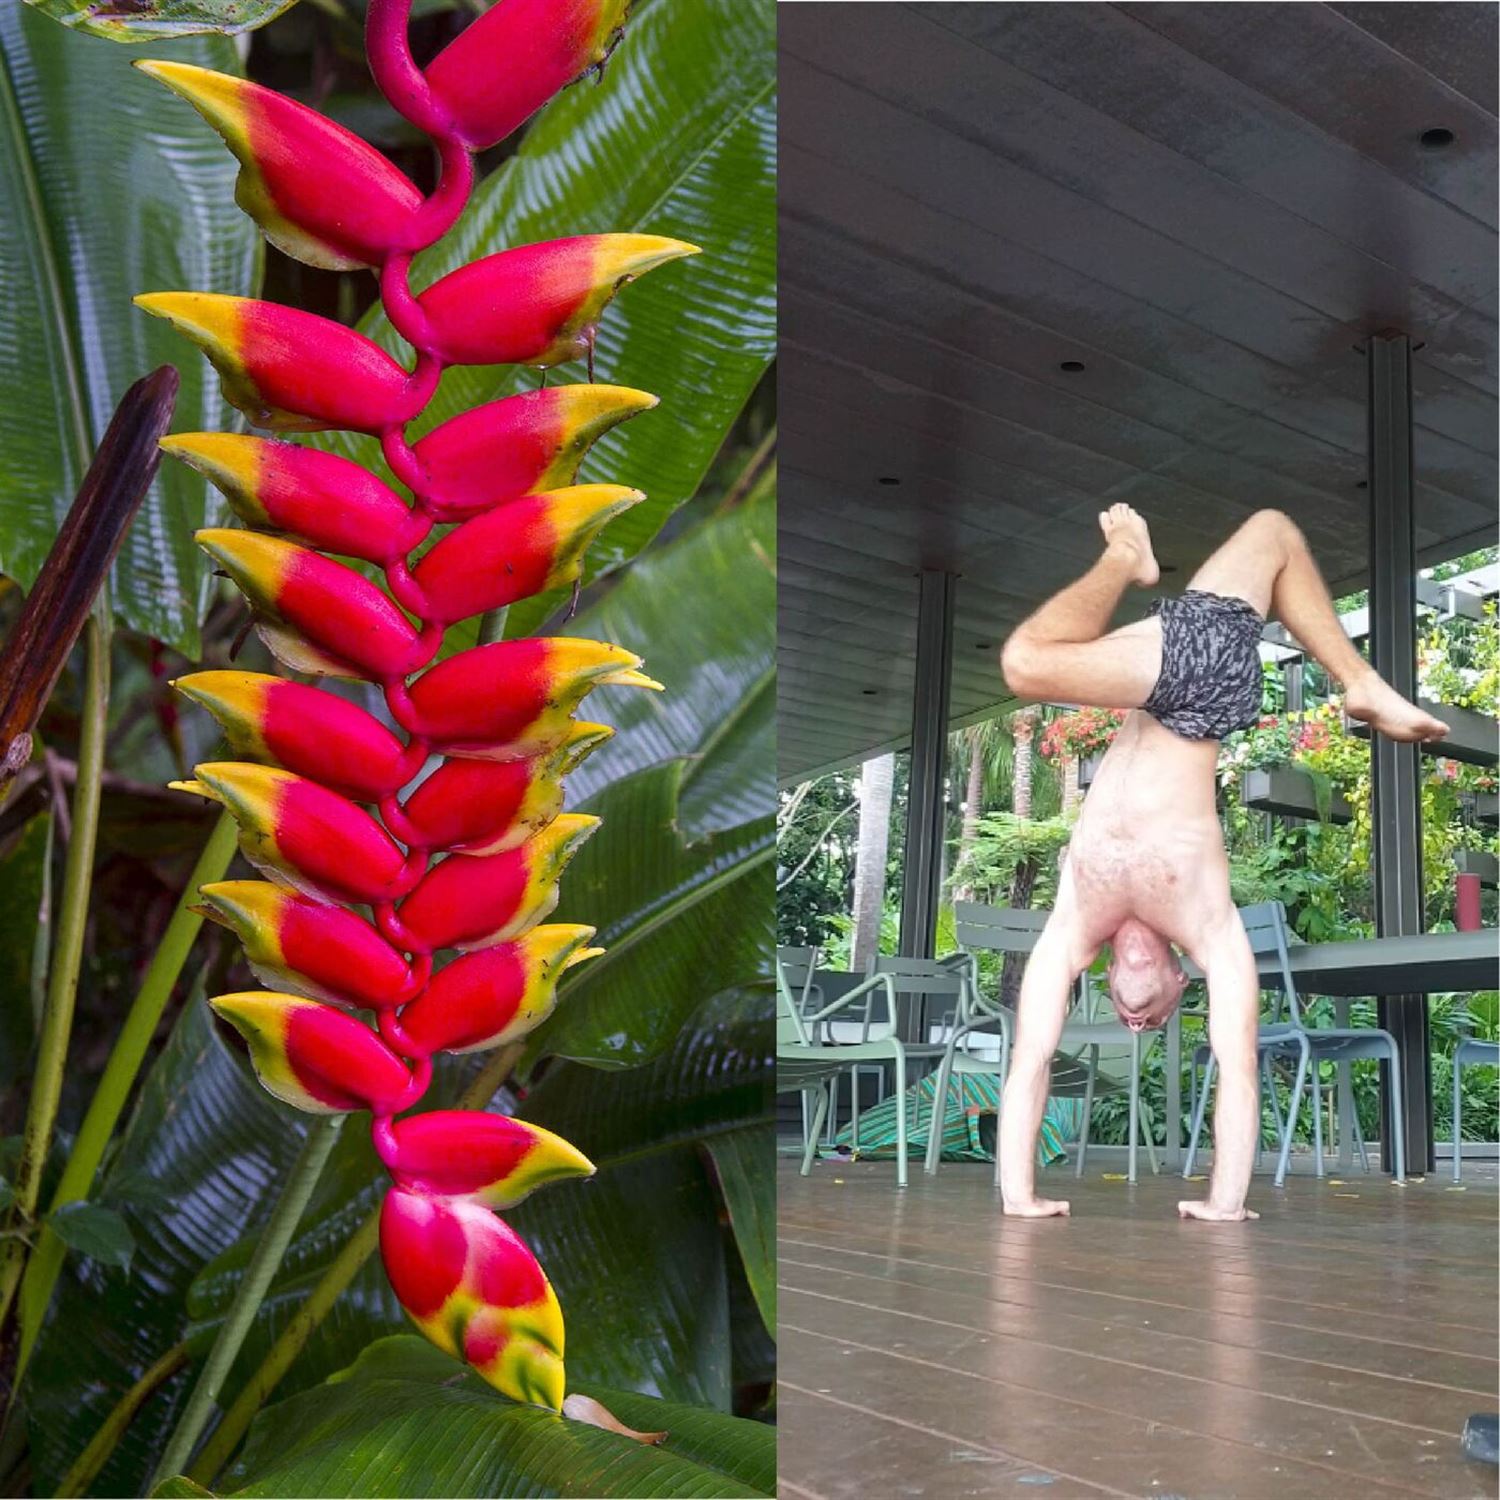 The Art: Botany, swimming & handstands